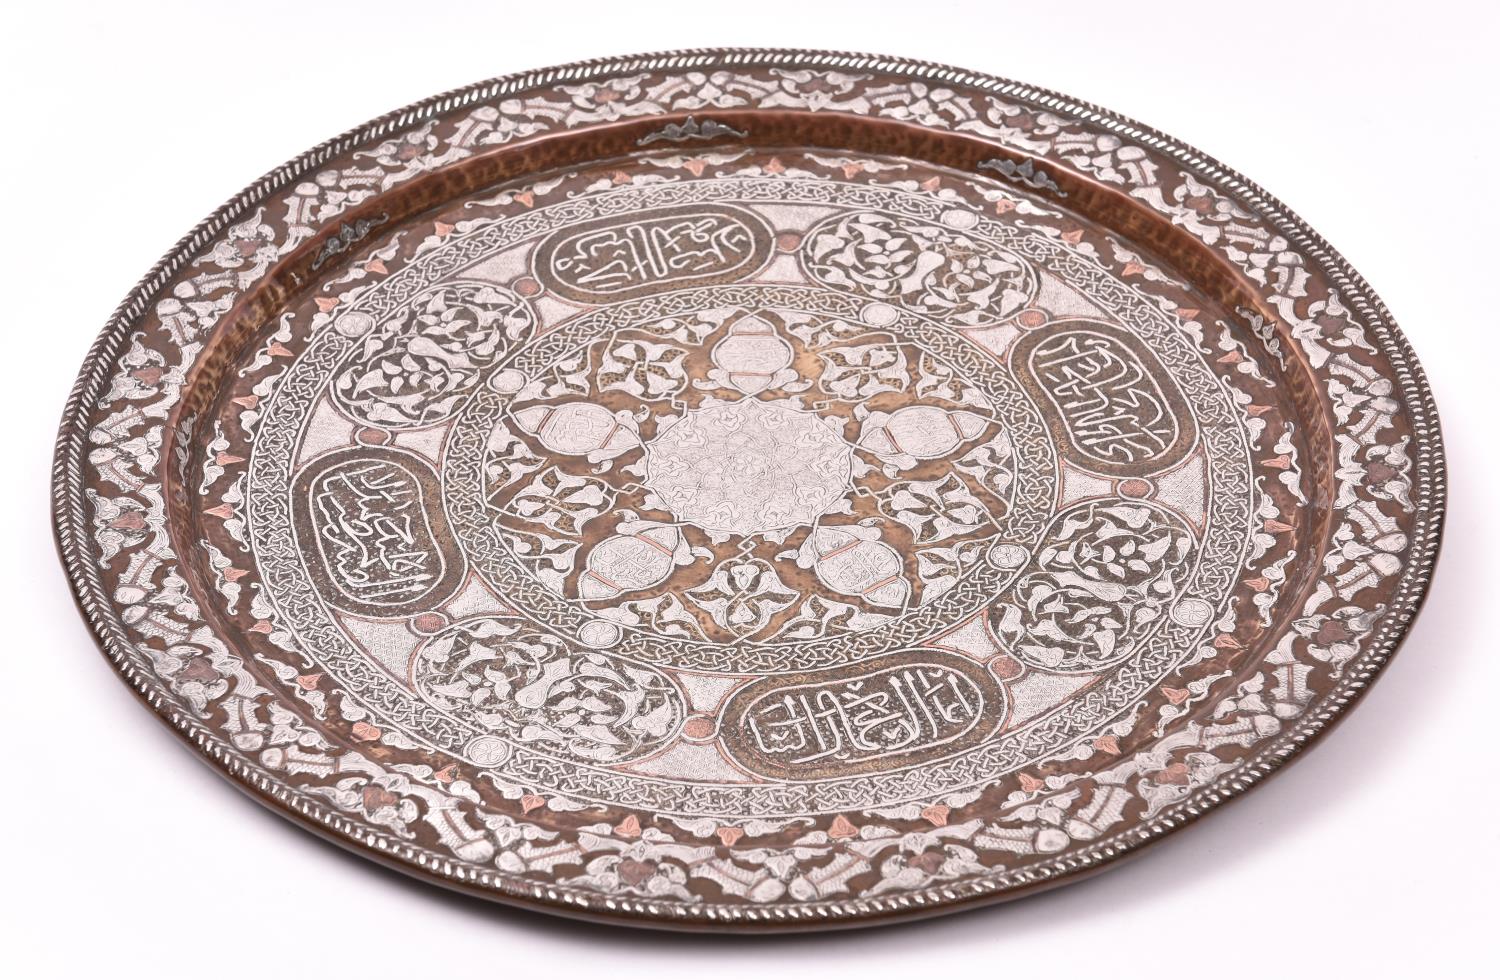 A large 19th Century Cairoware tray set. Of possibly Egypt, Morocco or Syria Mamluk origin. - Image 3 of 10